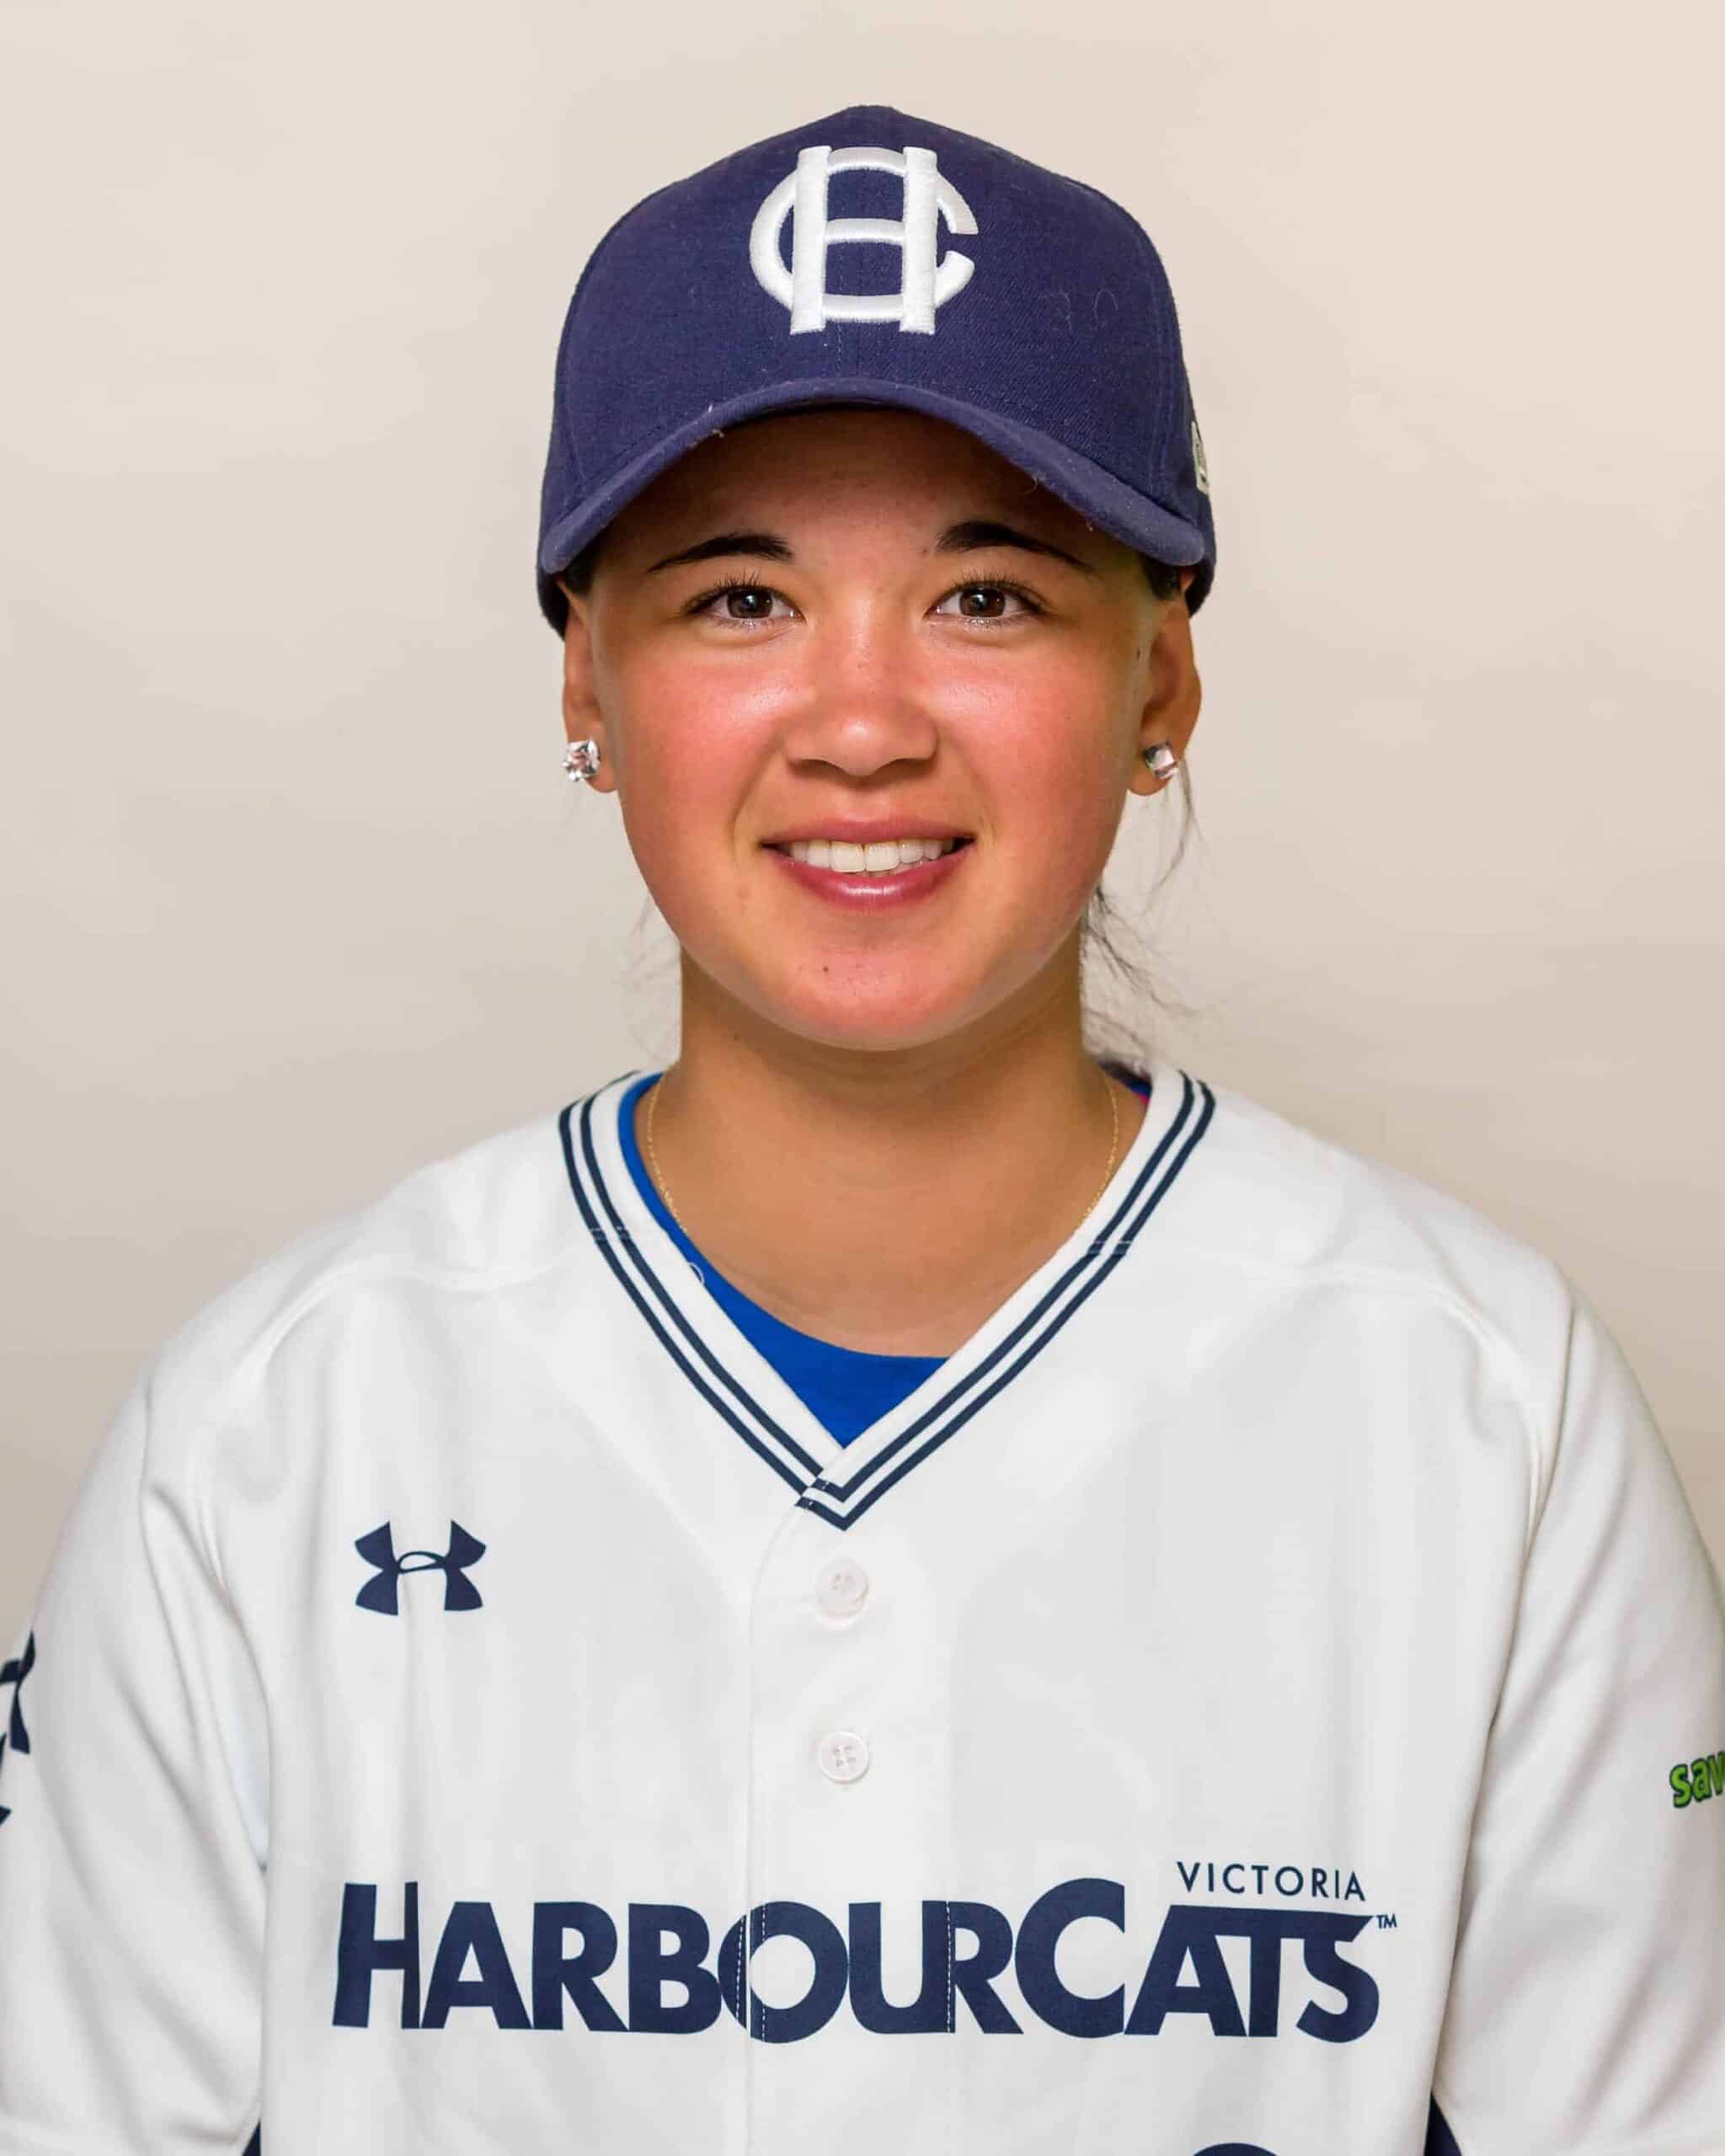 Claire Eccles, 19, pitches while posing for a photograph at the University  of British Columbia in Vancouver, B.C., on Friday May 12, 2017. The  Victoria HarbourCats announced Tuesday that Eccles will join